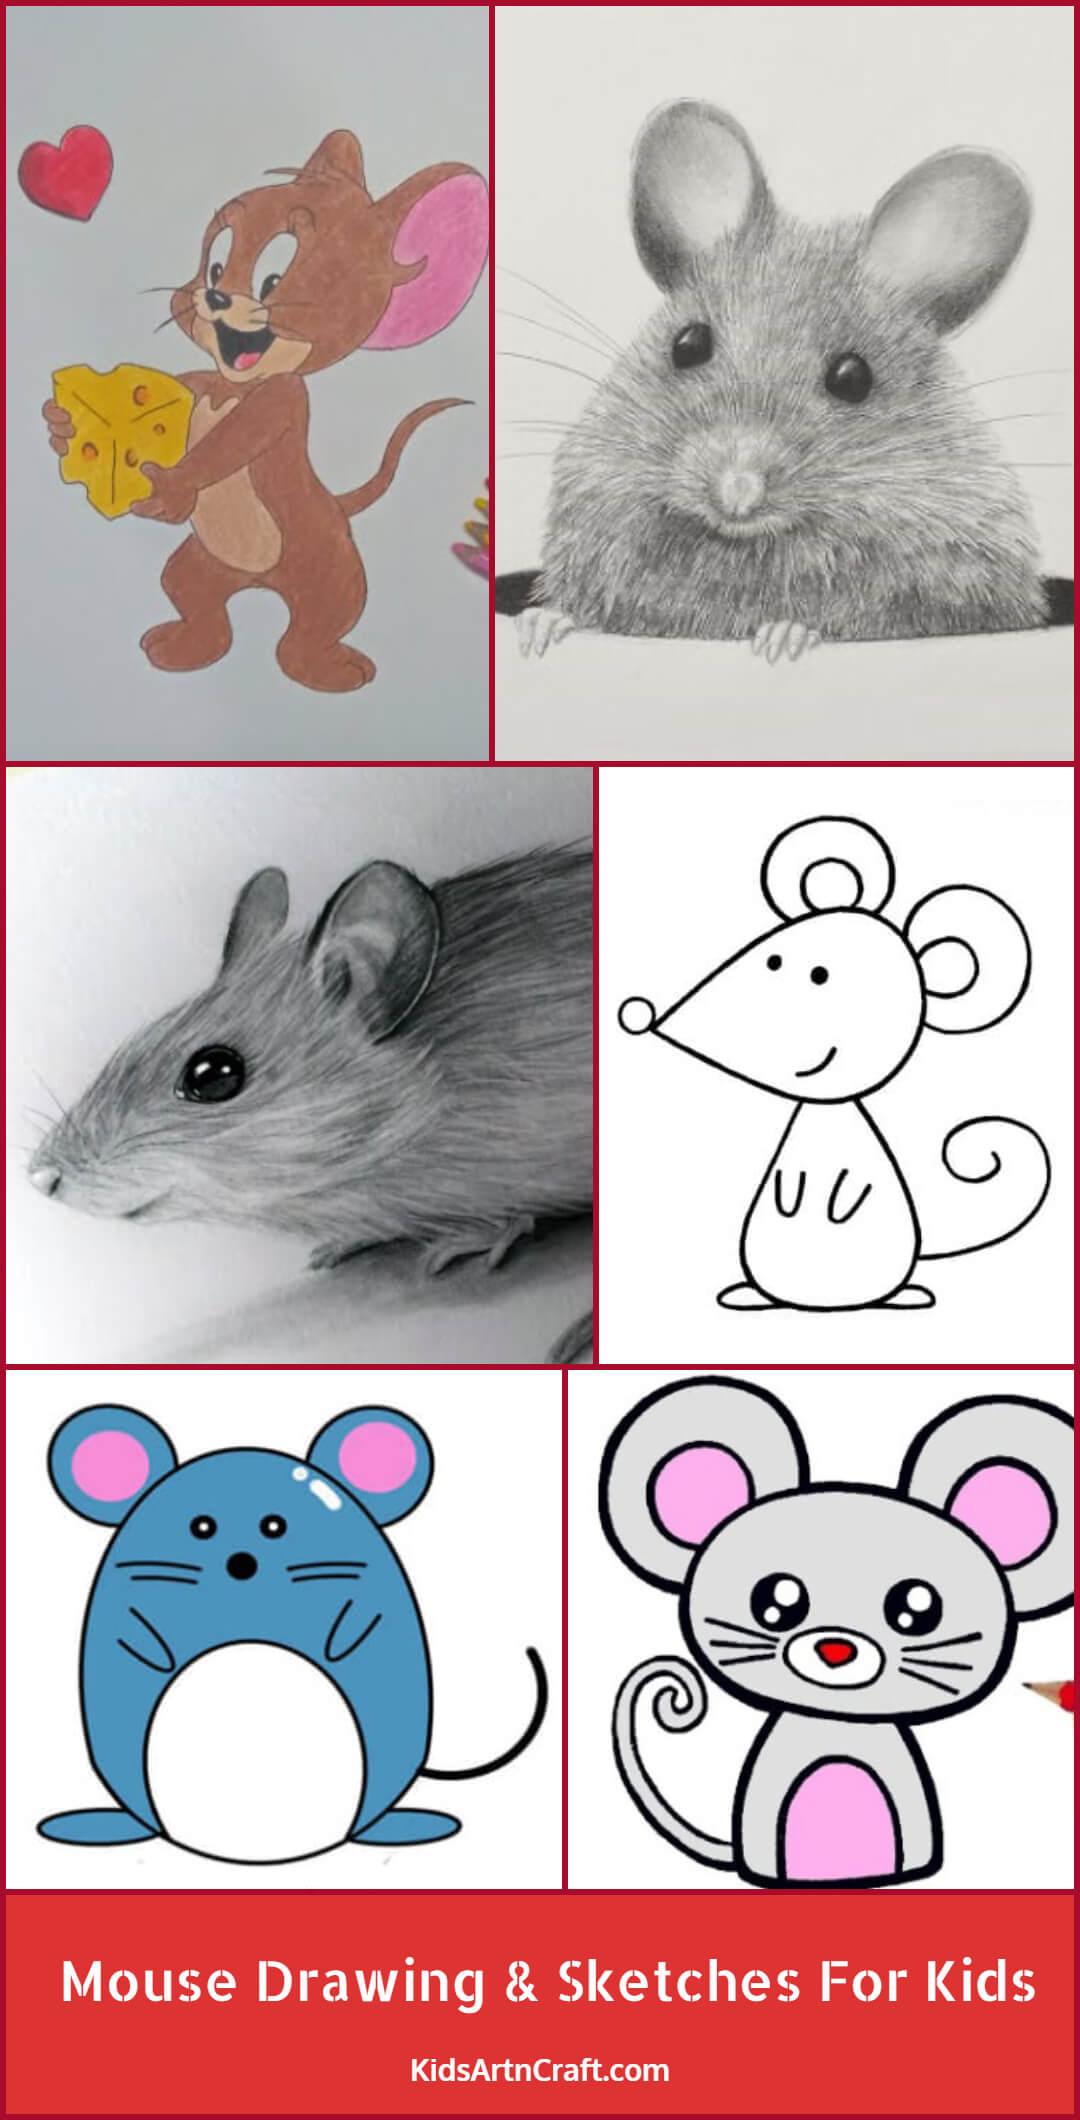 How to Draw a Mouse for Kids - Easy Drawing Tutorial